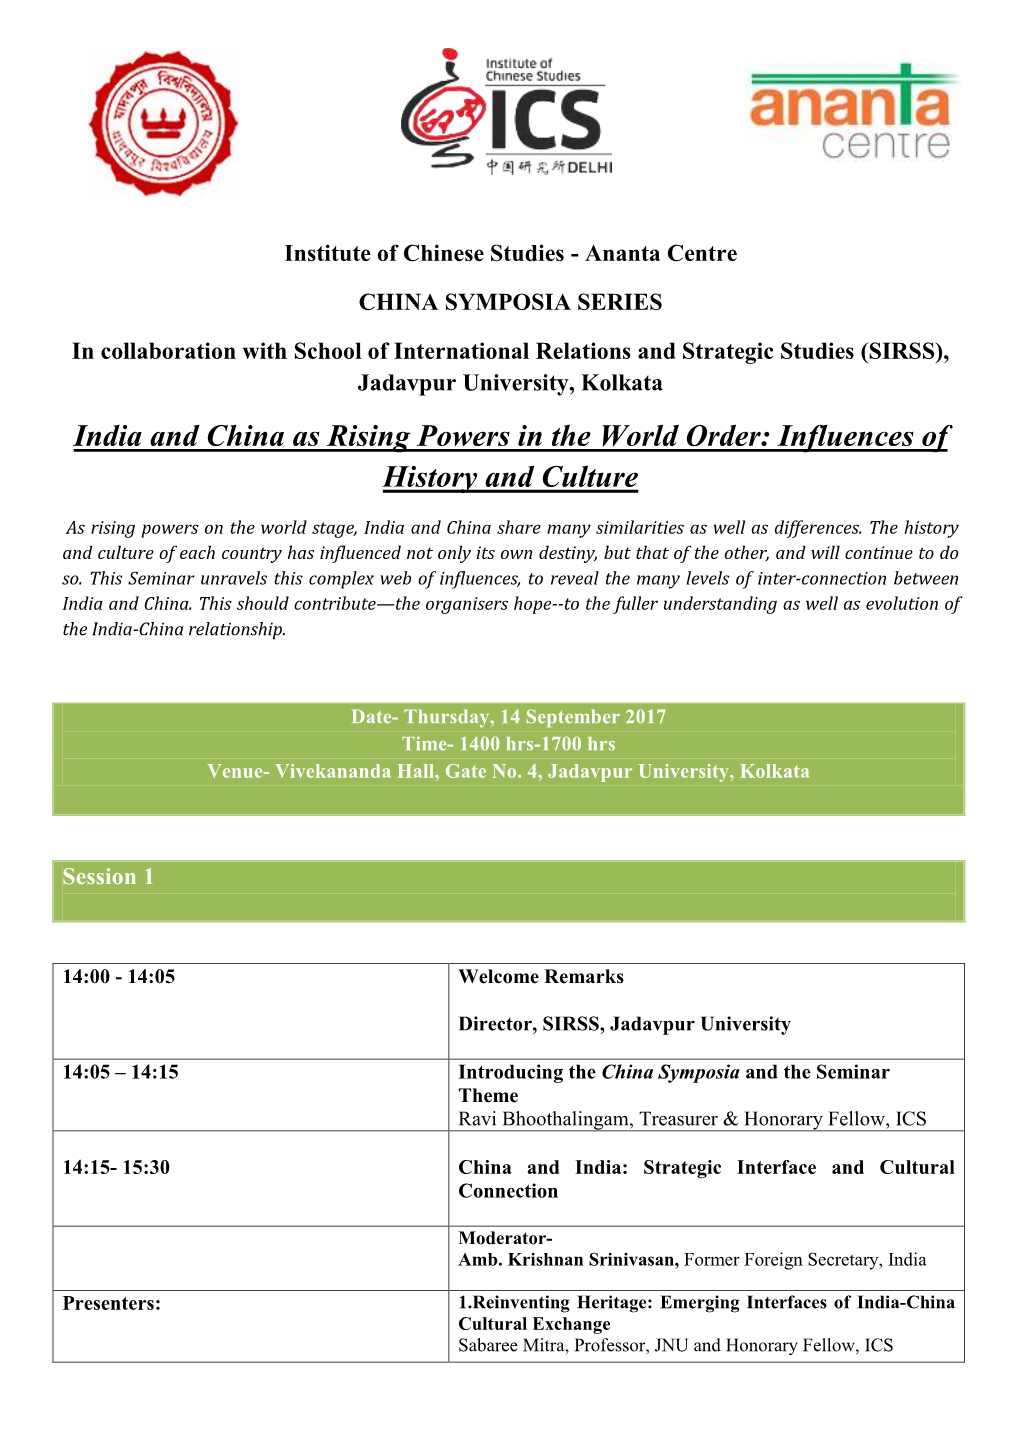 India and China As Rising Powers in the World Order: Influences of History and Culture